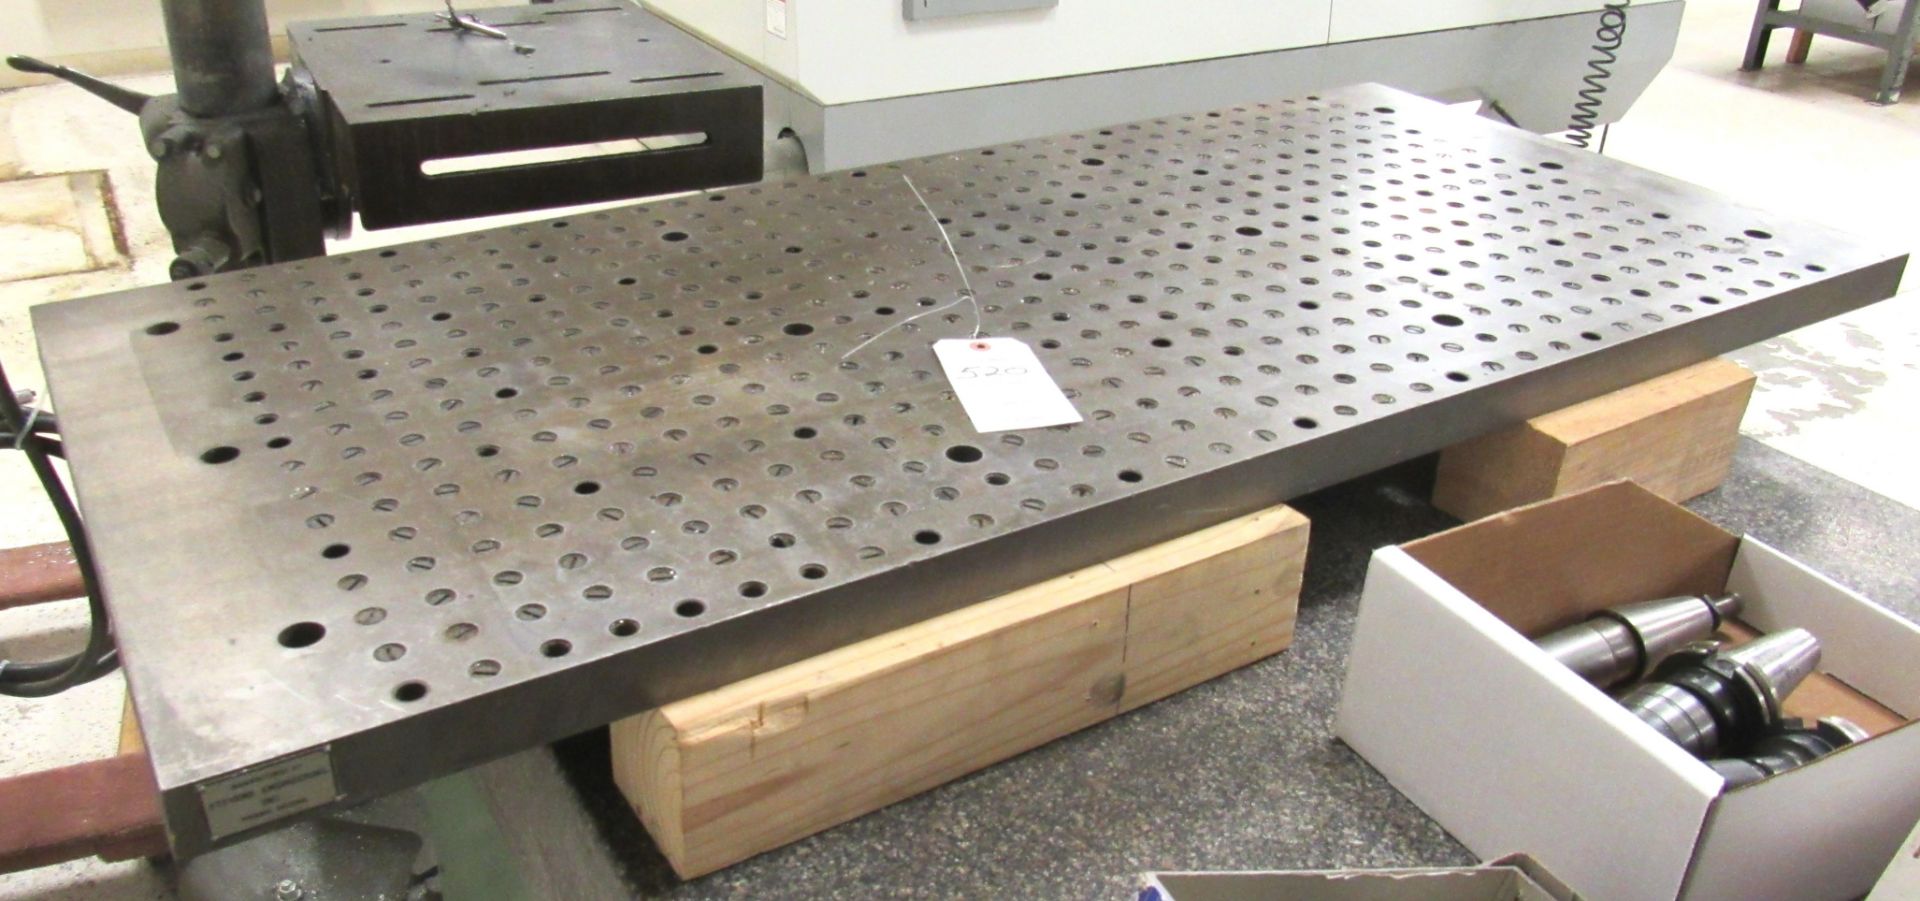 Stevens Engineering 21.5" x 48" Drilled & Tapped Sub Plate